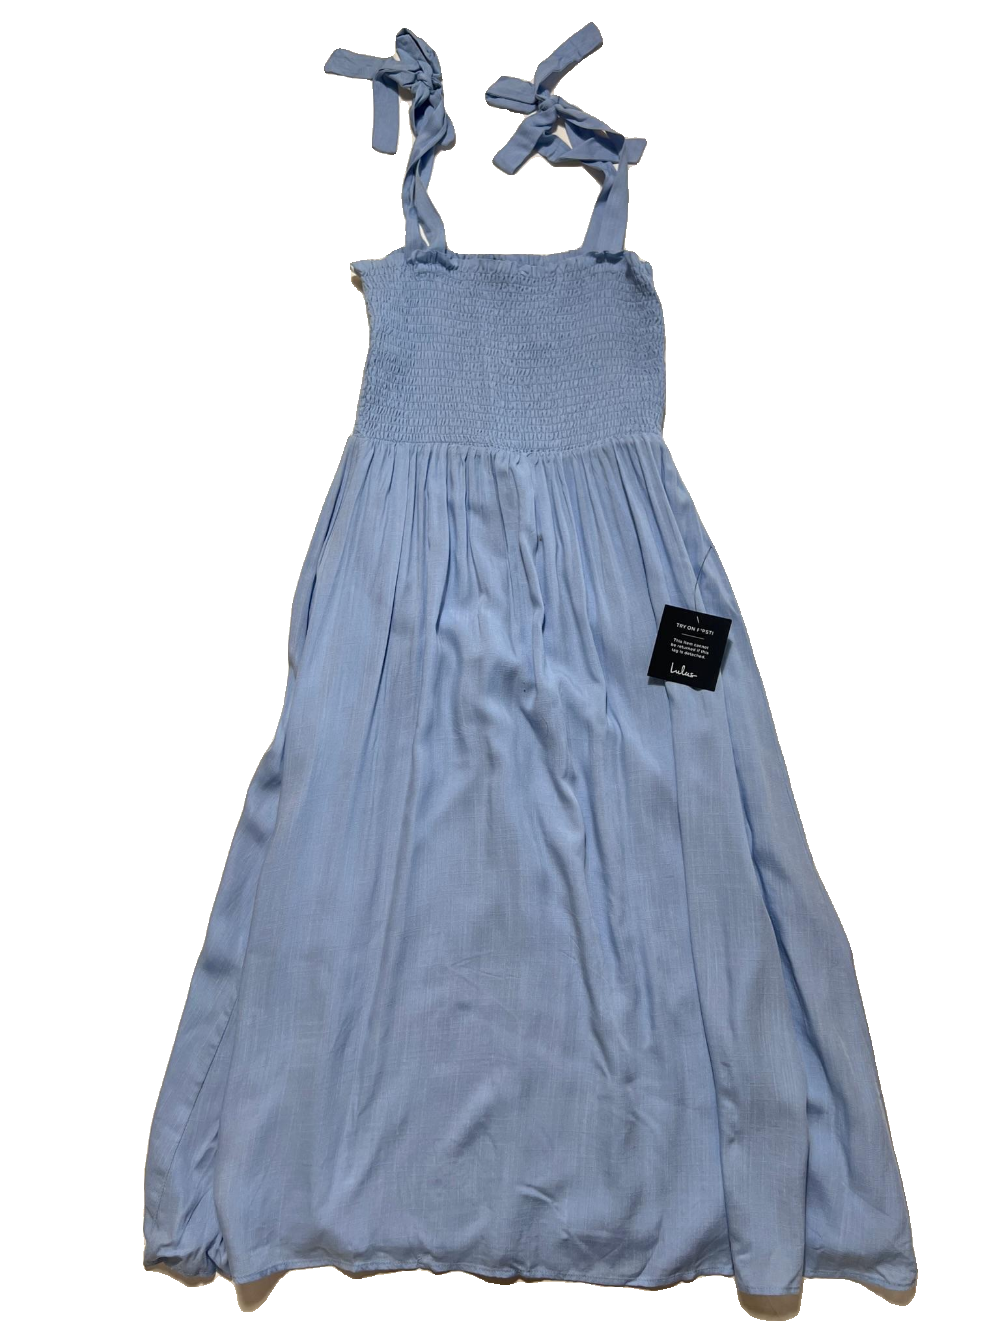 Lulus- Light Blue Dress NEW WITH TAGS!